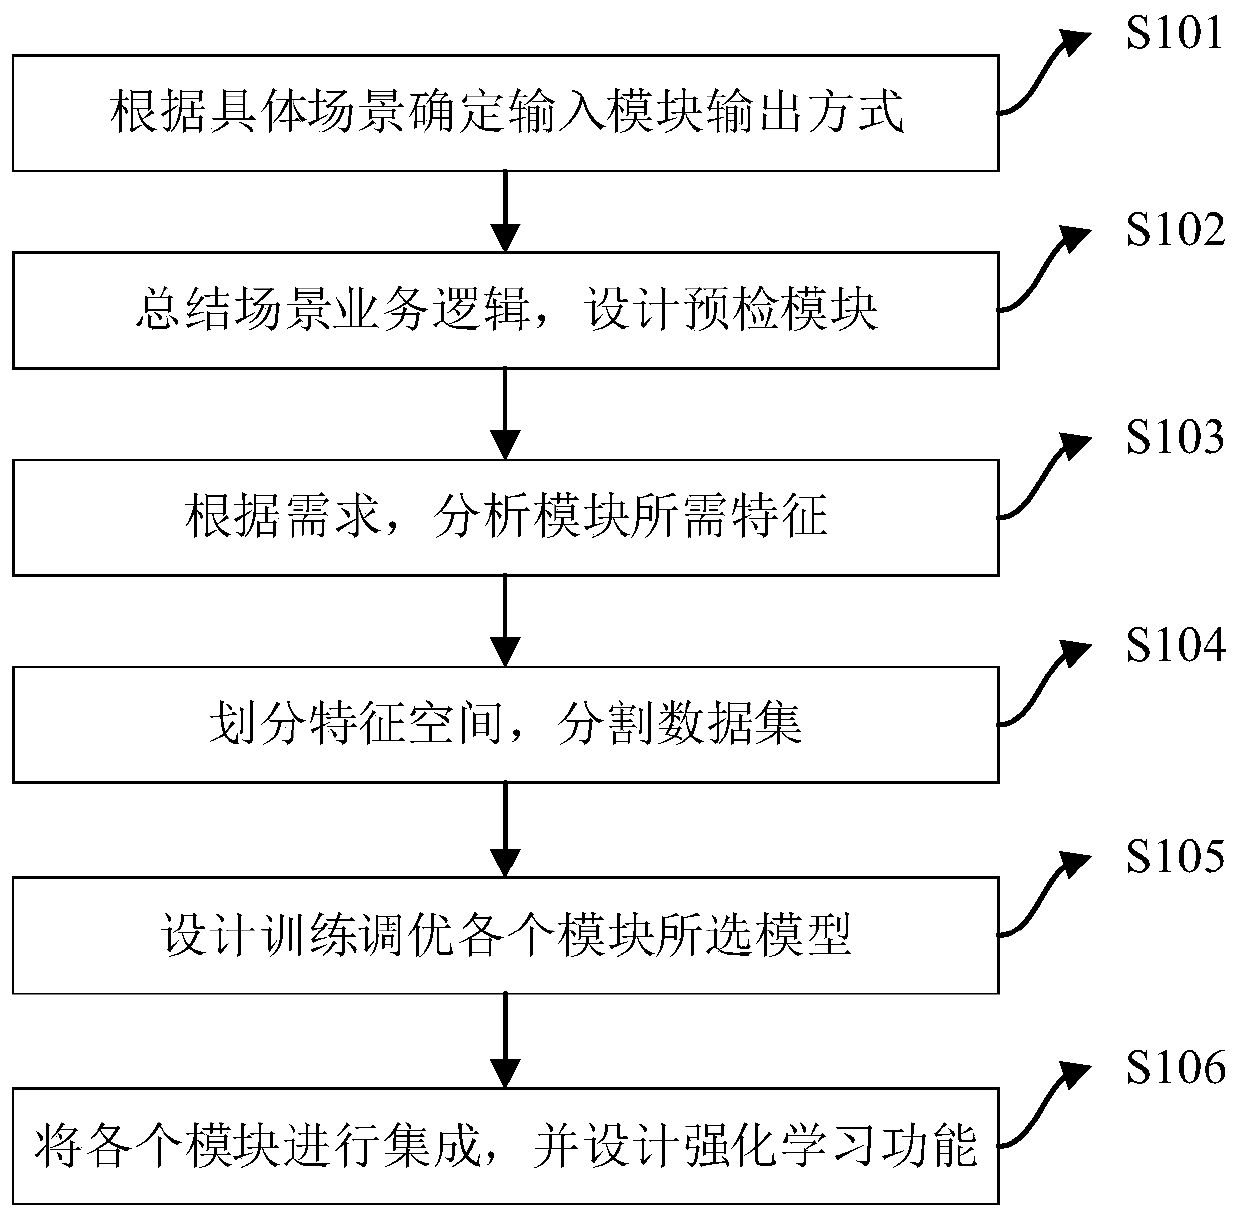 Network payment anti-fraud system architecture design method based on suspected fraud transaction reference order